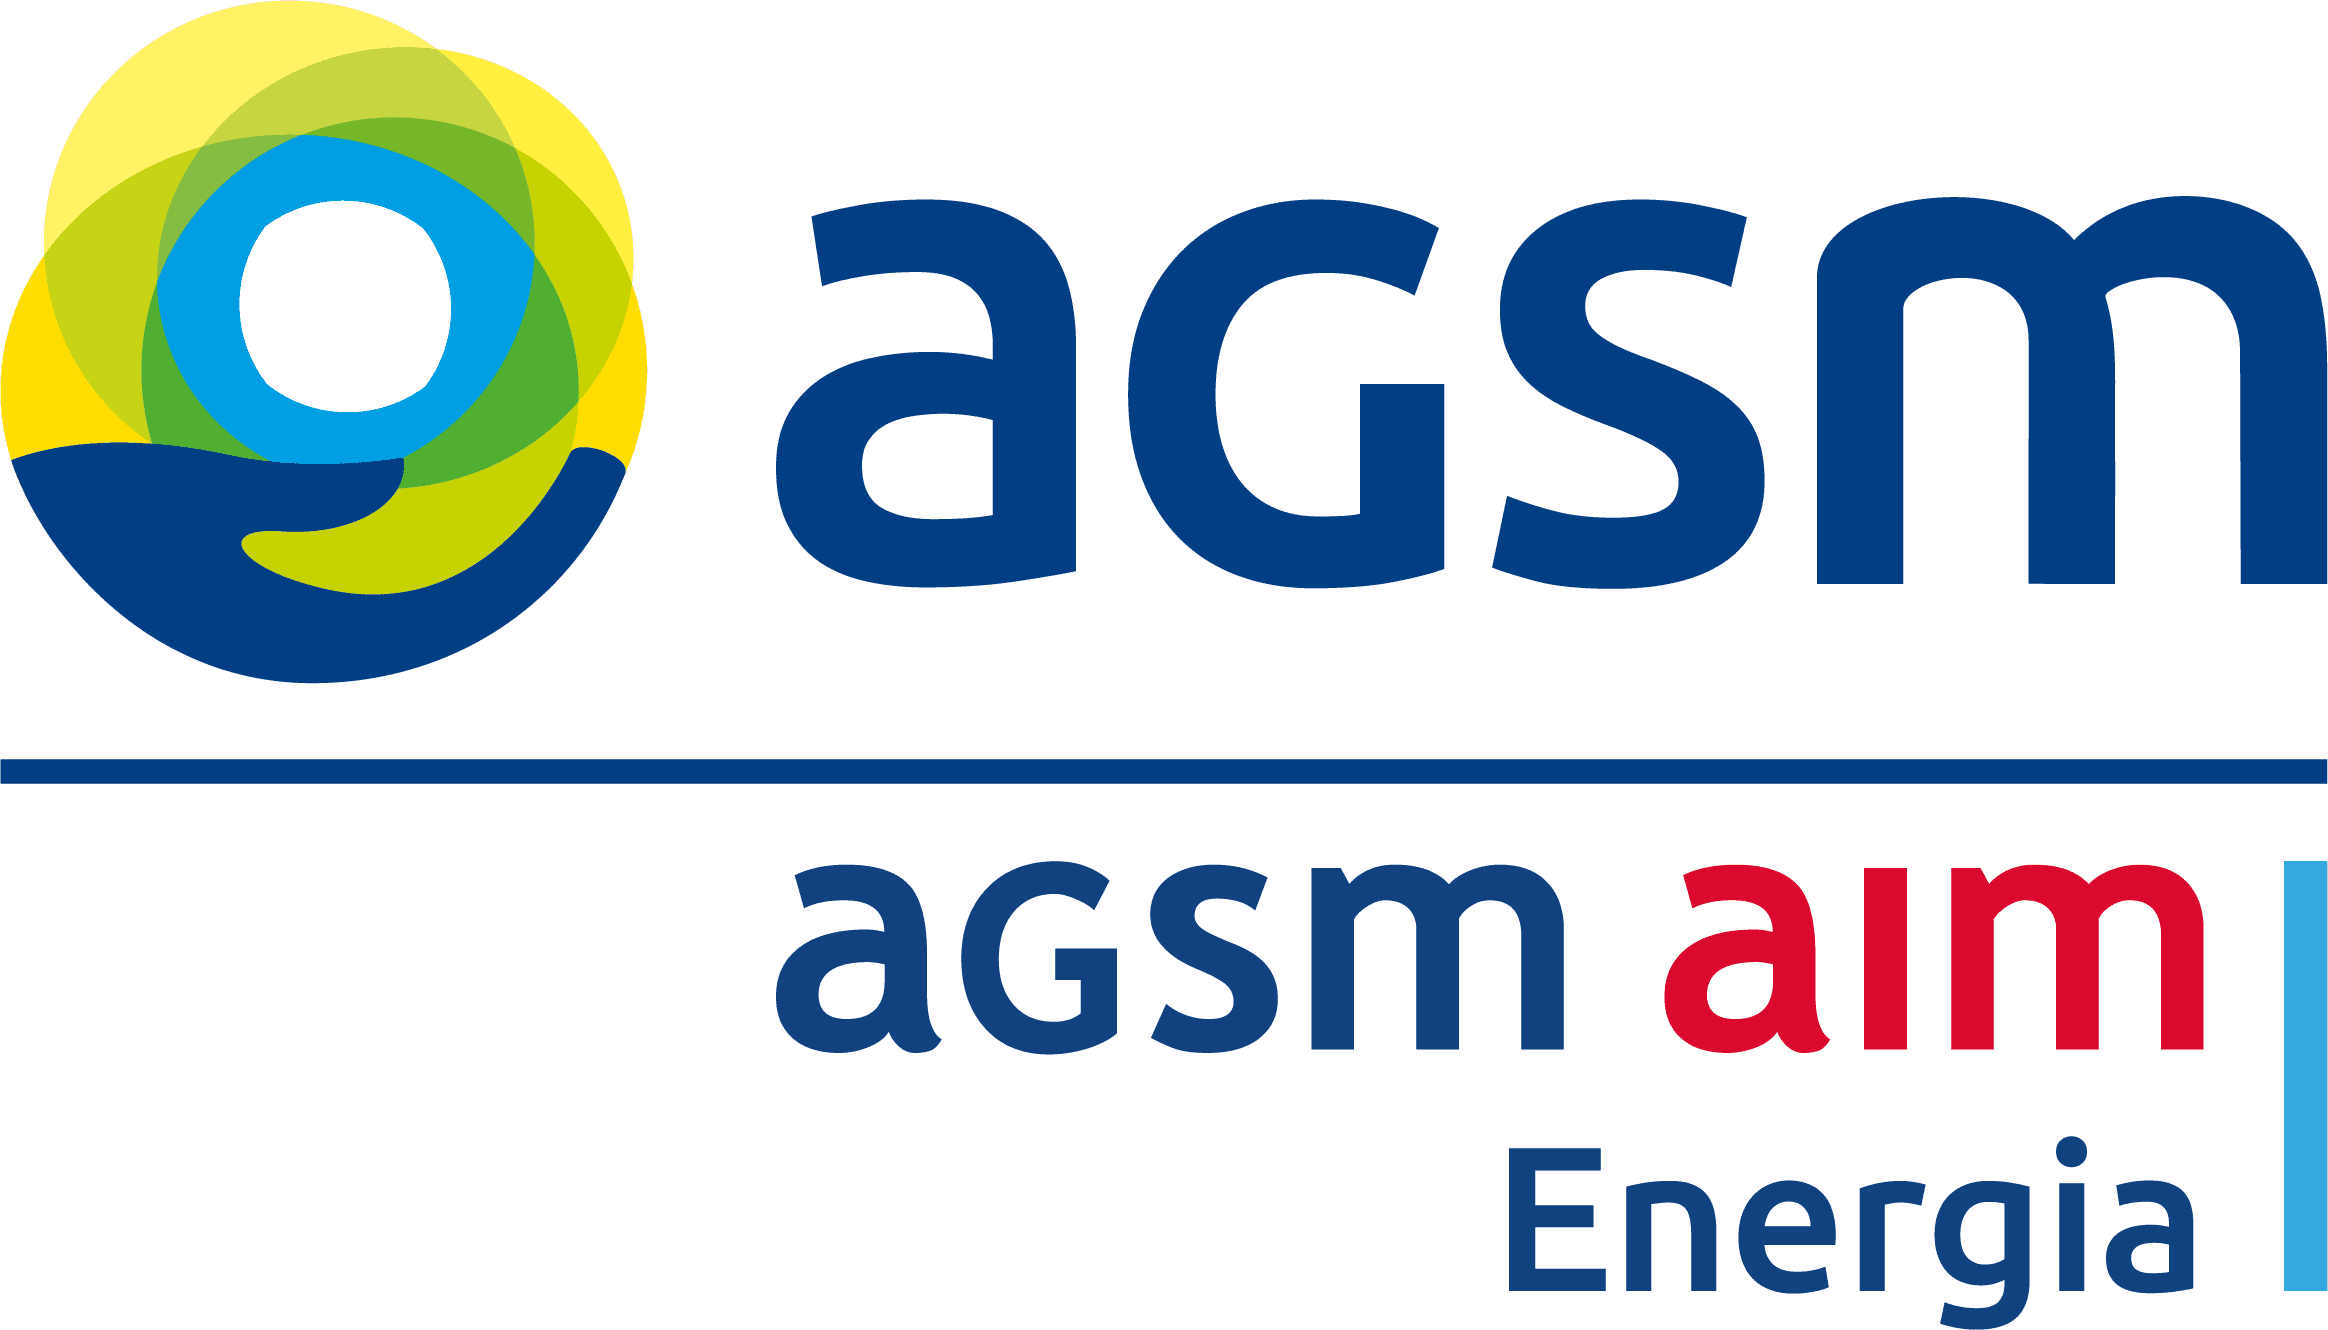 Agsm Energia